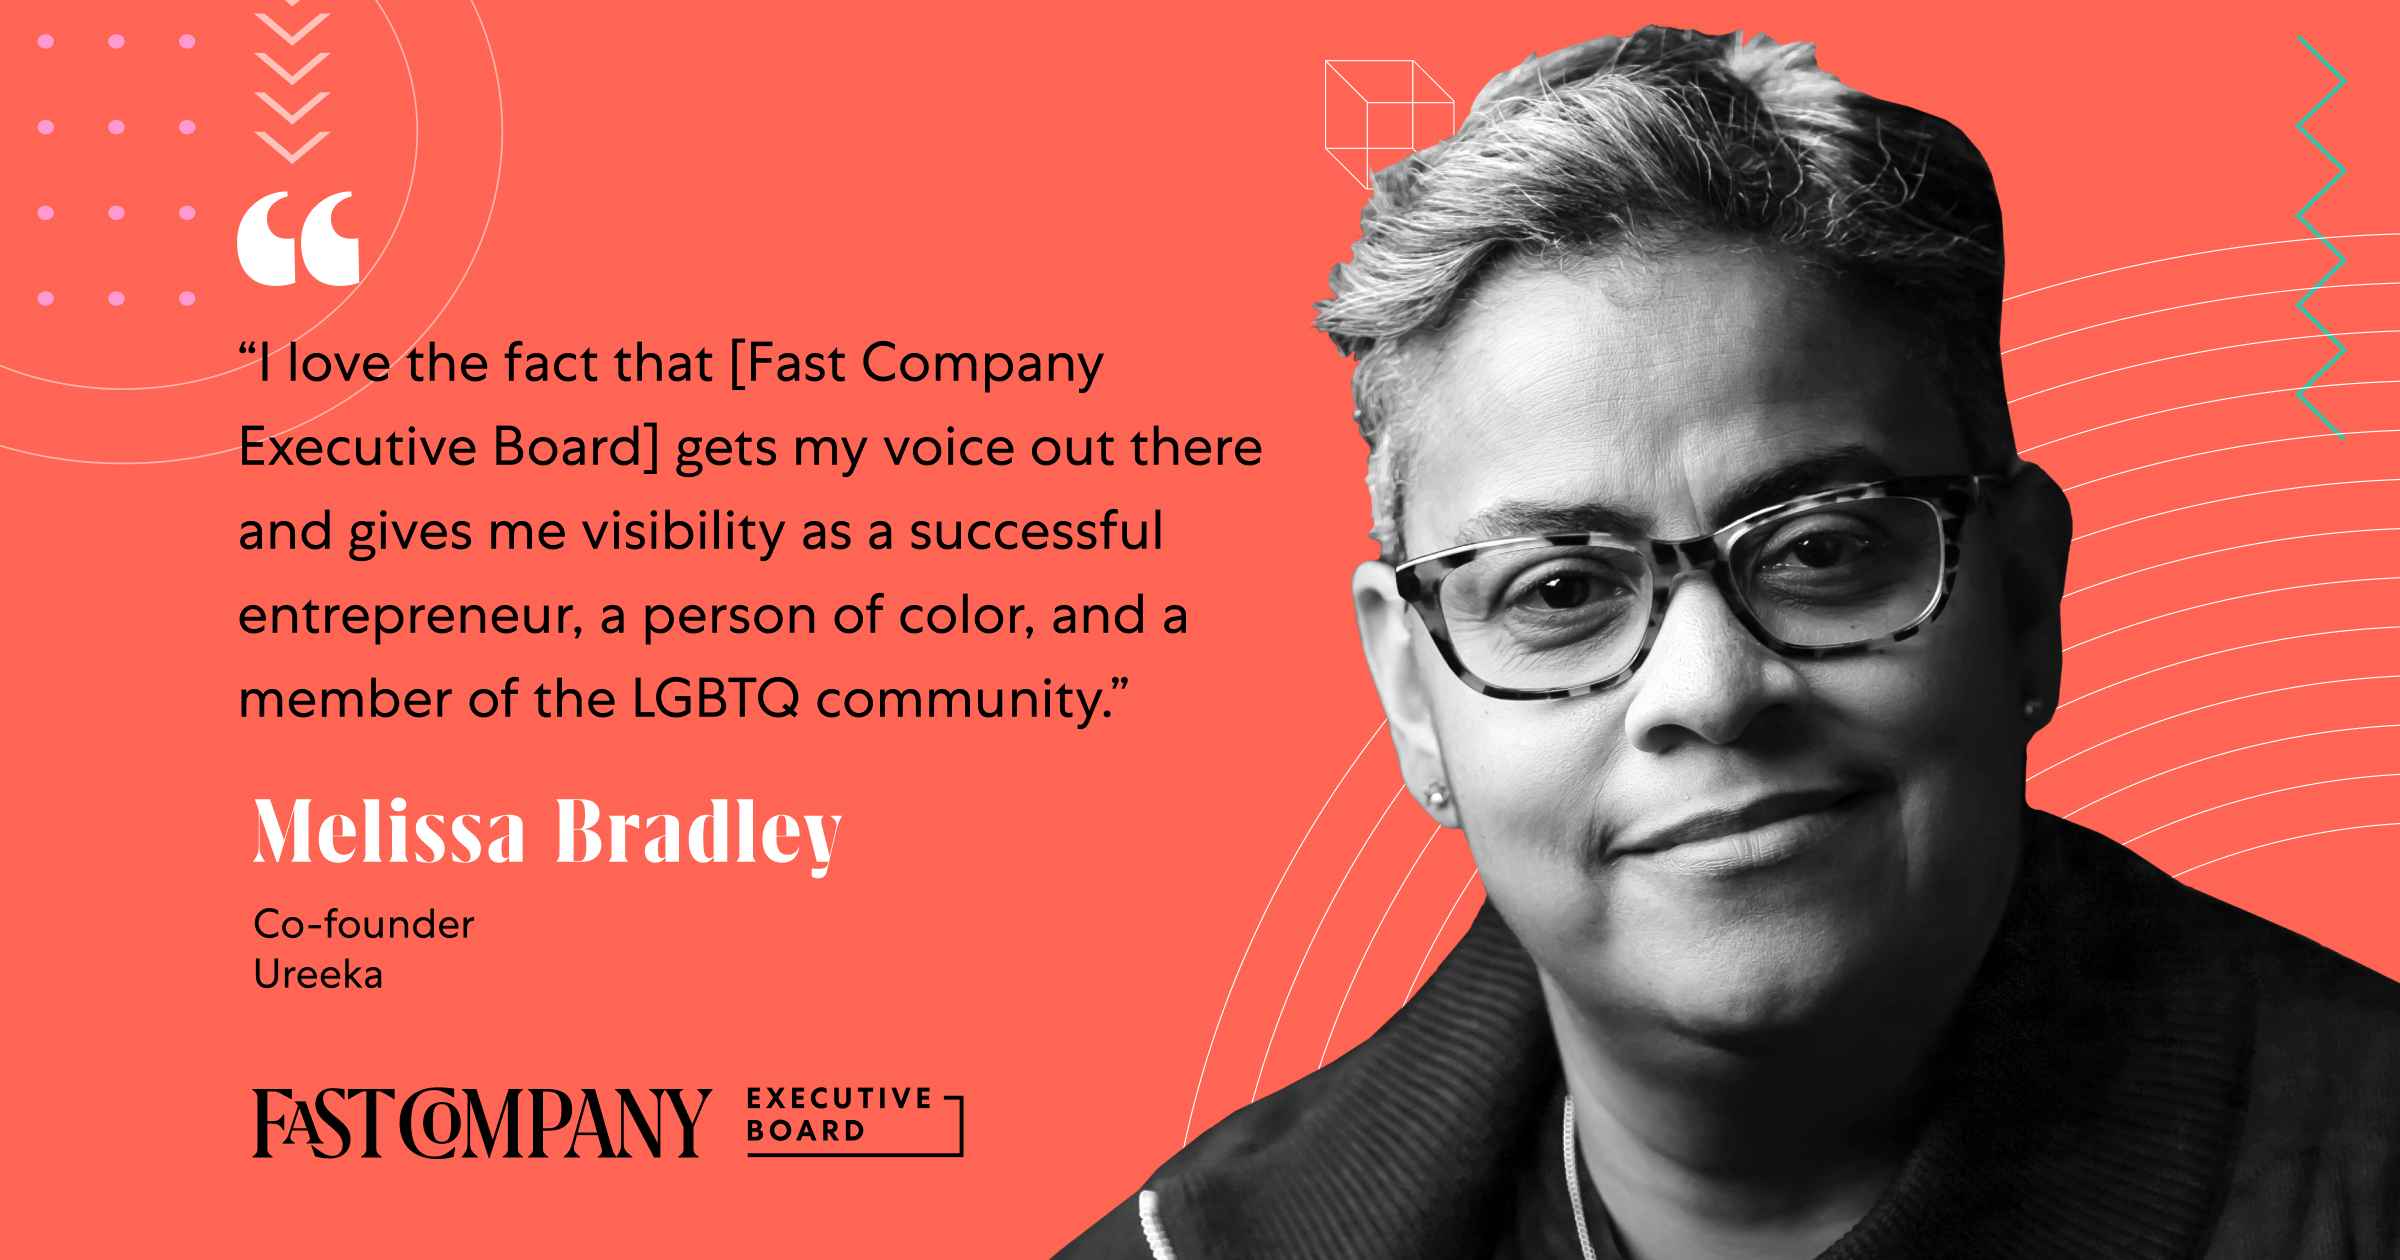 Fast Company Executive Board Helps Melissa Bradley Amplify Her Voice